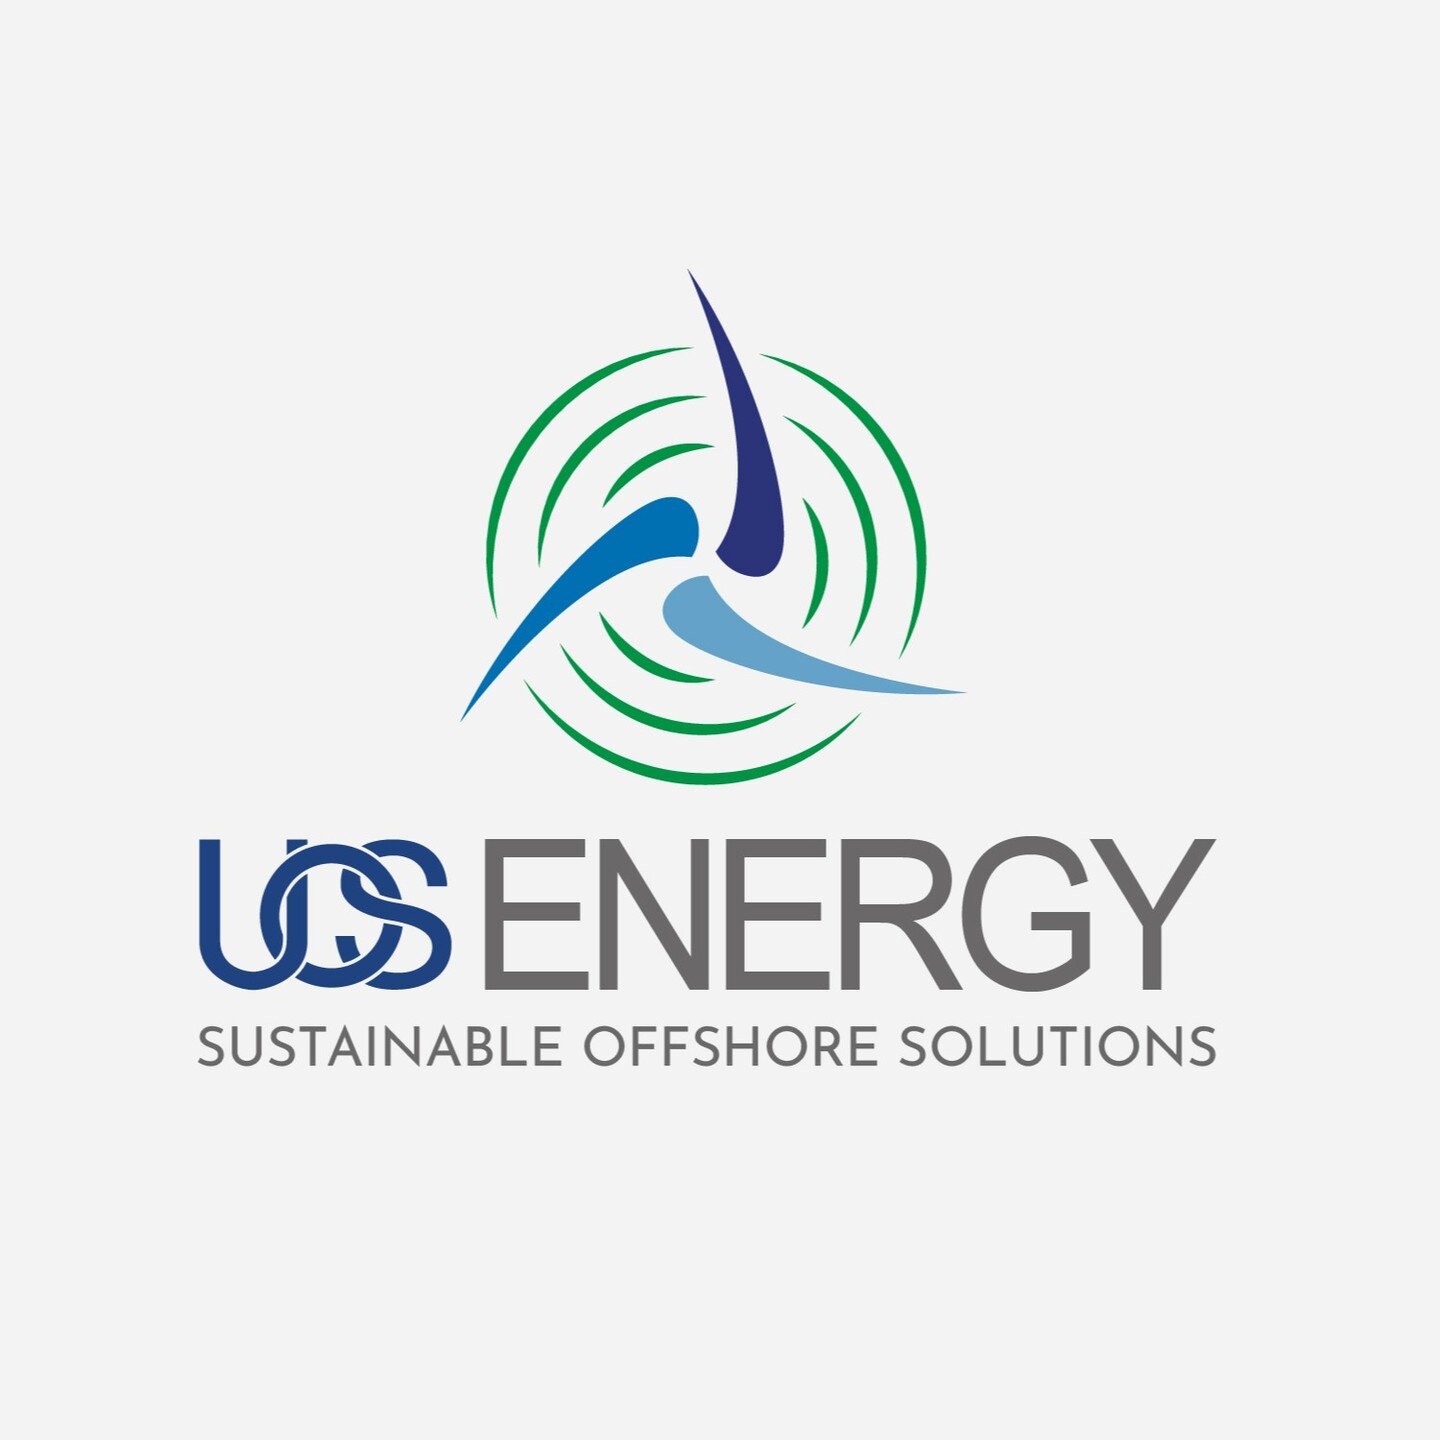 UOS is a leading service provider to the global offshore industry, excelling in the management and operation of support vessels. UOS is one of many international companies I had the pleasure of working with.
✏️ ⠀
Follow @designbykeri on Instagram, Fa